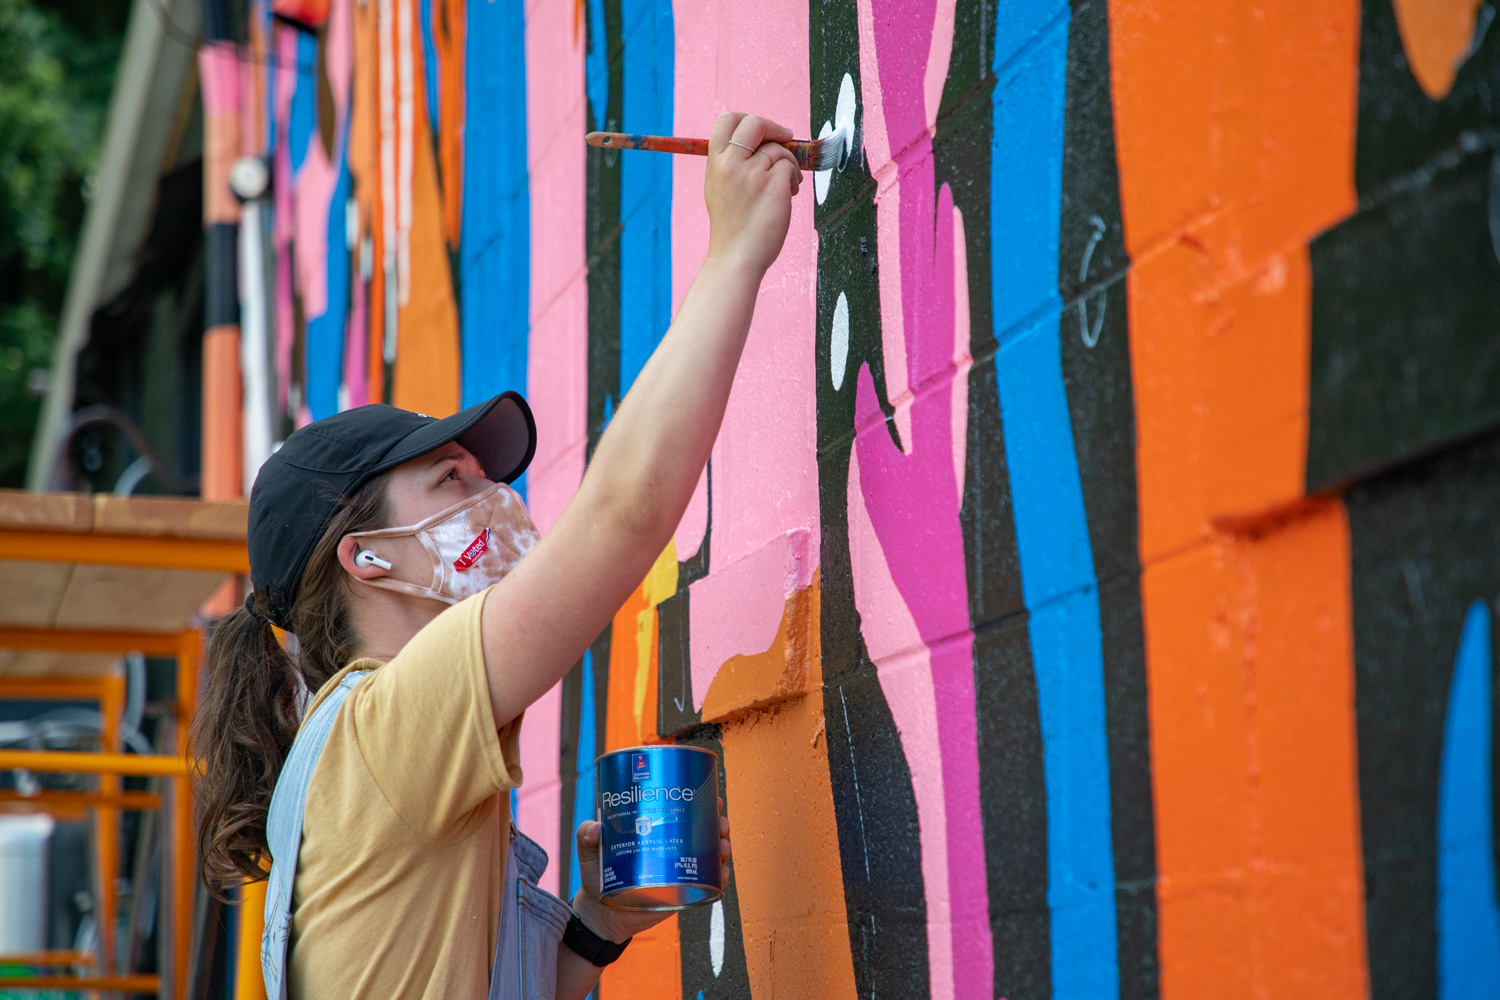 Paris Woodhull’s mural in Knoxville for Walls for Women